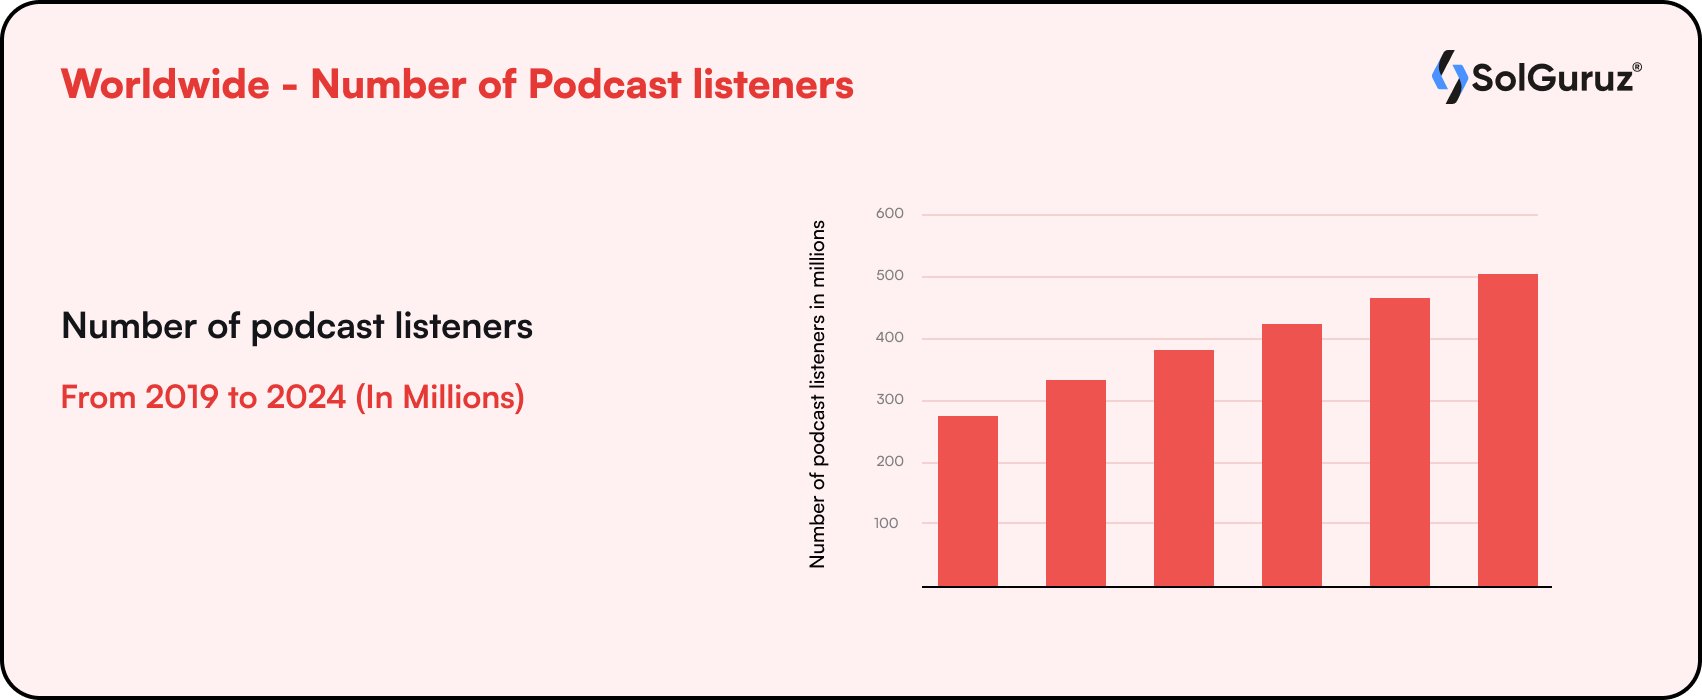 Number of Podcast listeners Worldwide statistics